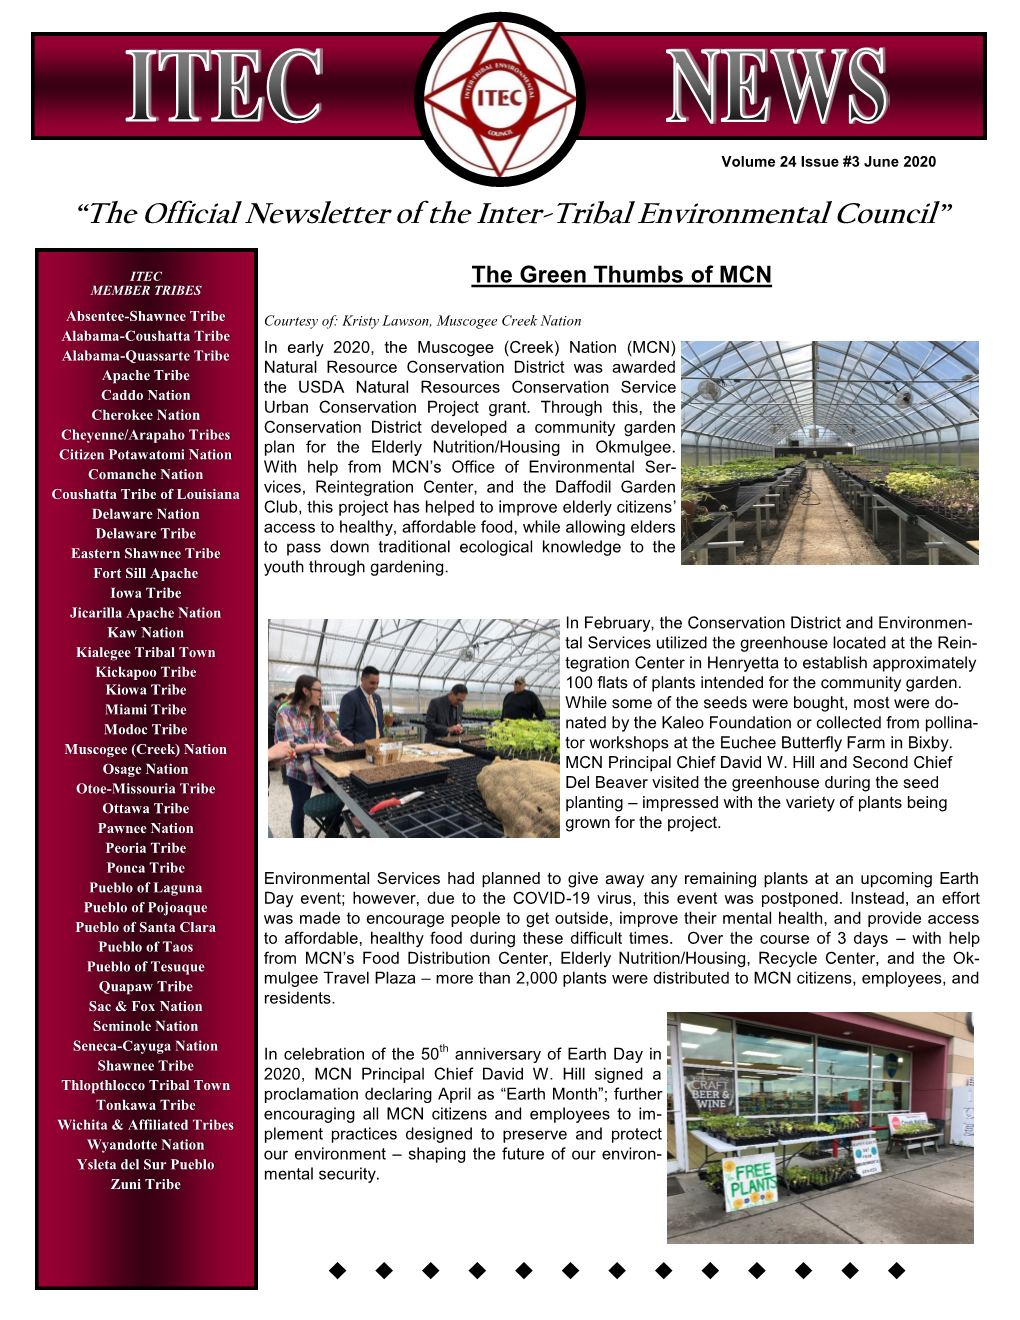 “The Official Newsletter of the Inter-Tribal Environmental Council”